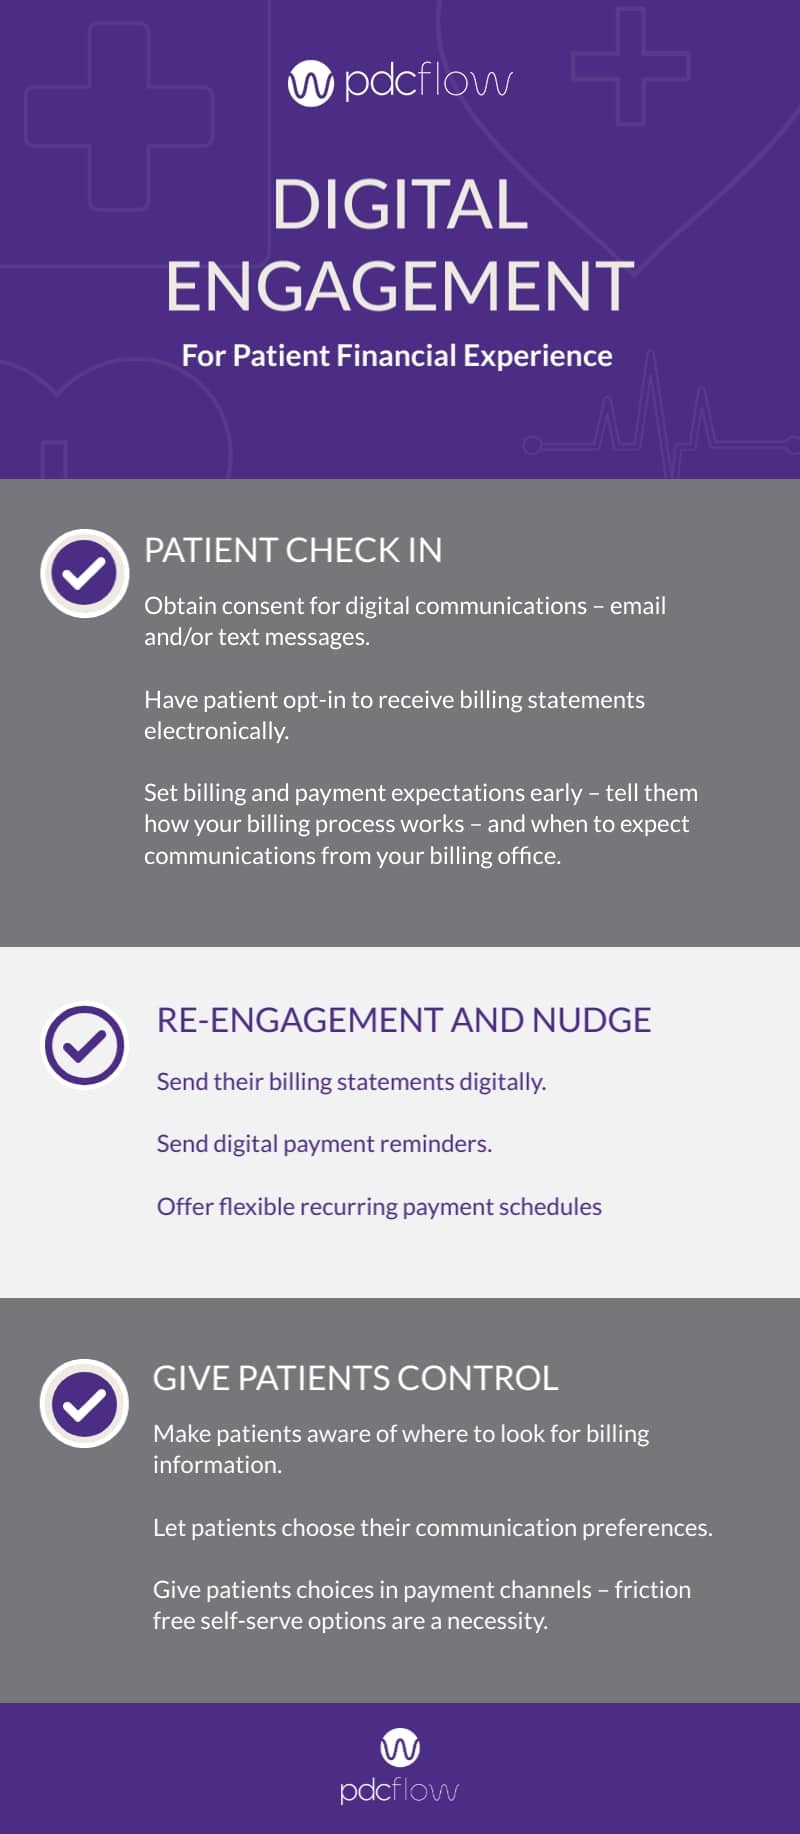 Digital Engagement for Patient Financial Experience Infographic